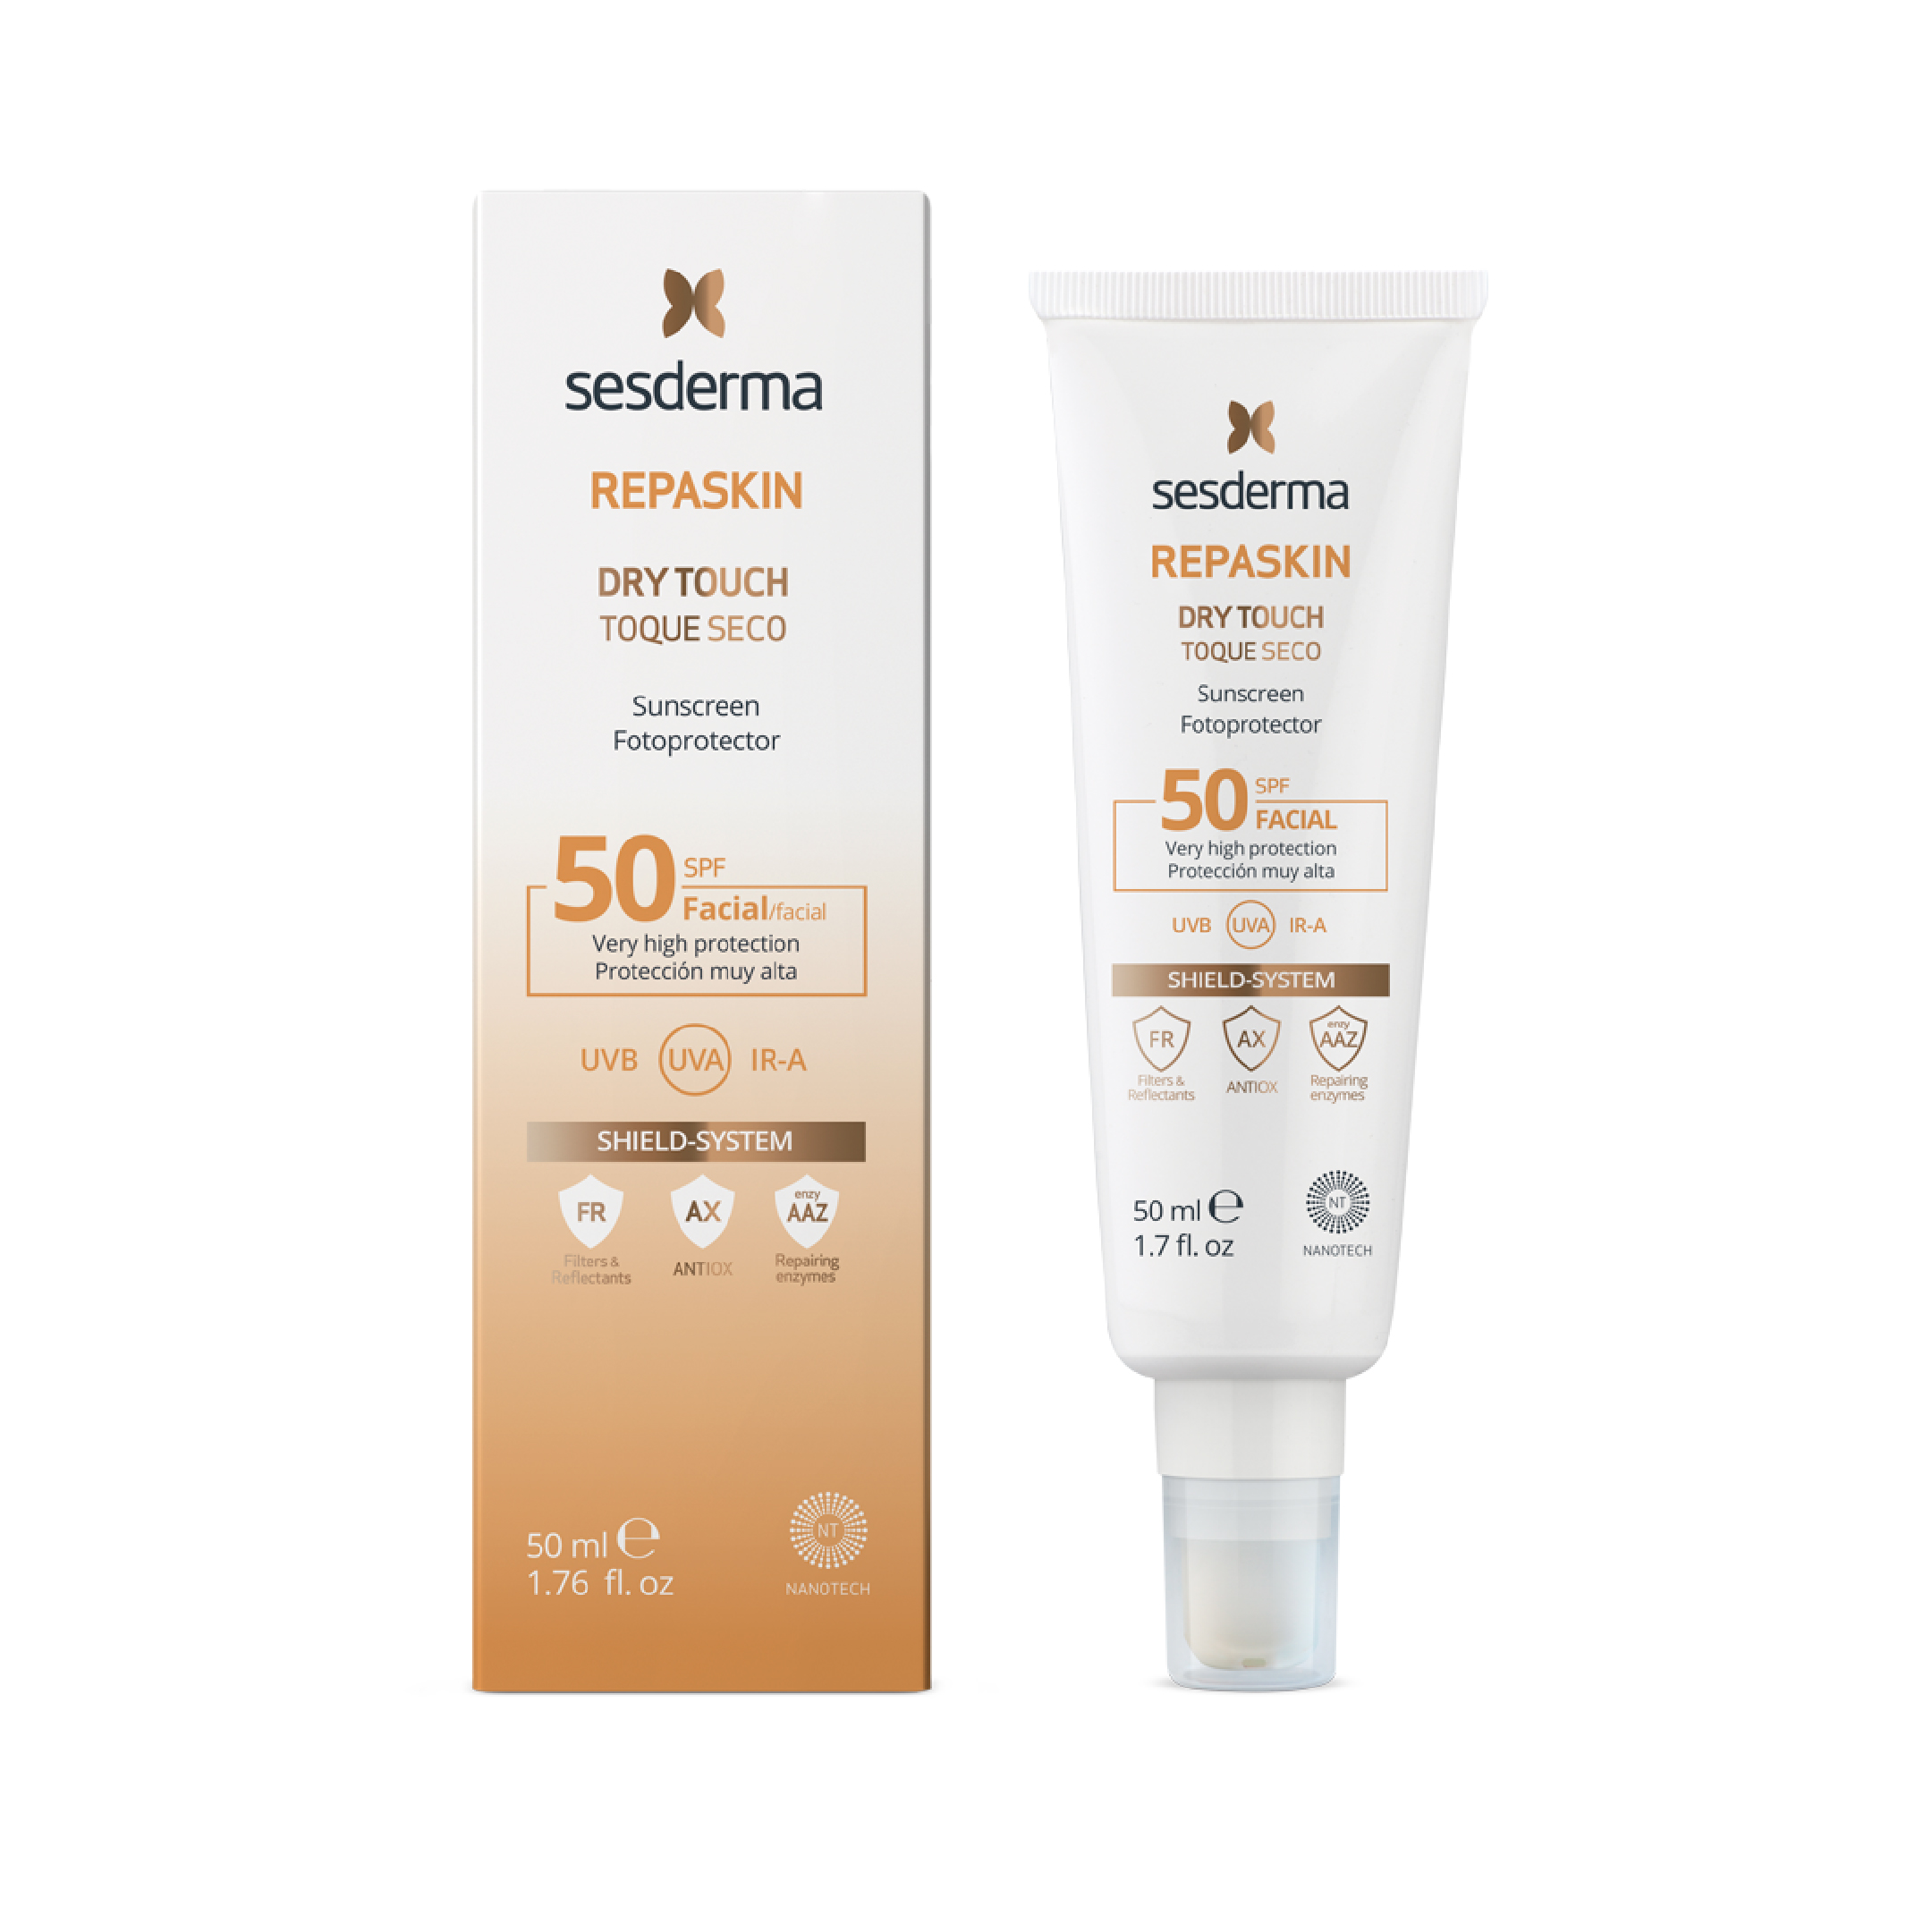 Fotoprotector Facial Sesderma Repaskin Dry Touch Toque Seco SPF 50 - Tubo 50 Ml